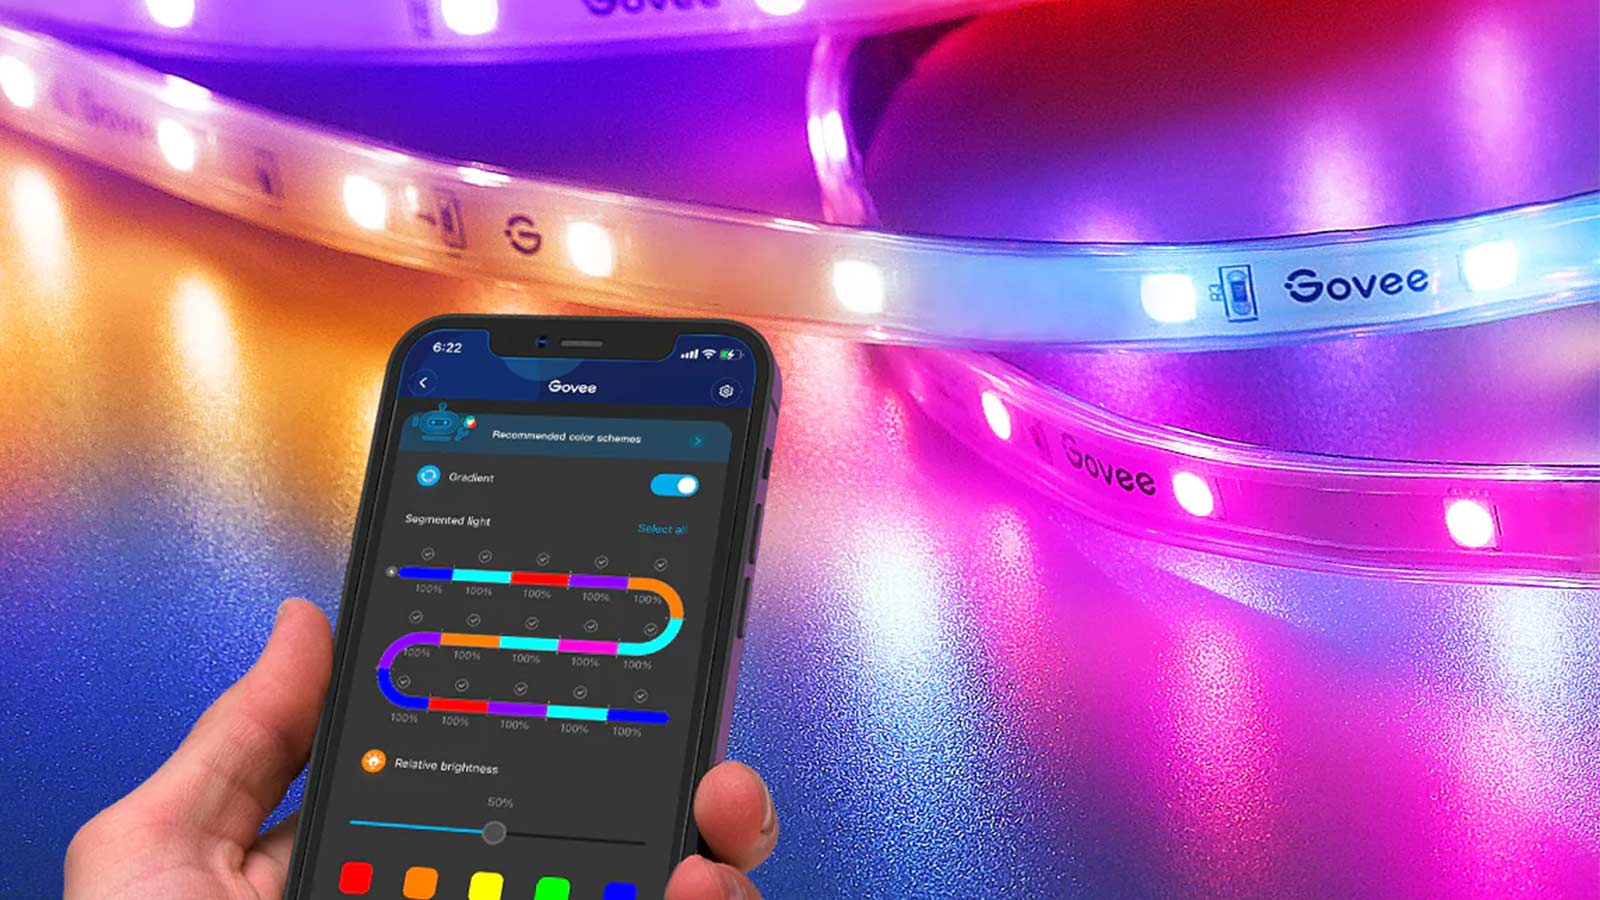 Our favorite smart lighting from Govee is up to 44% off for Cyber